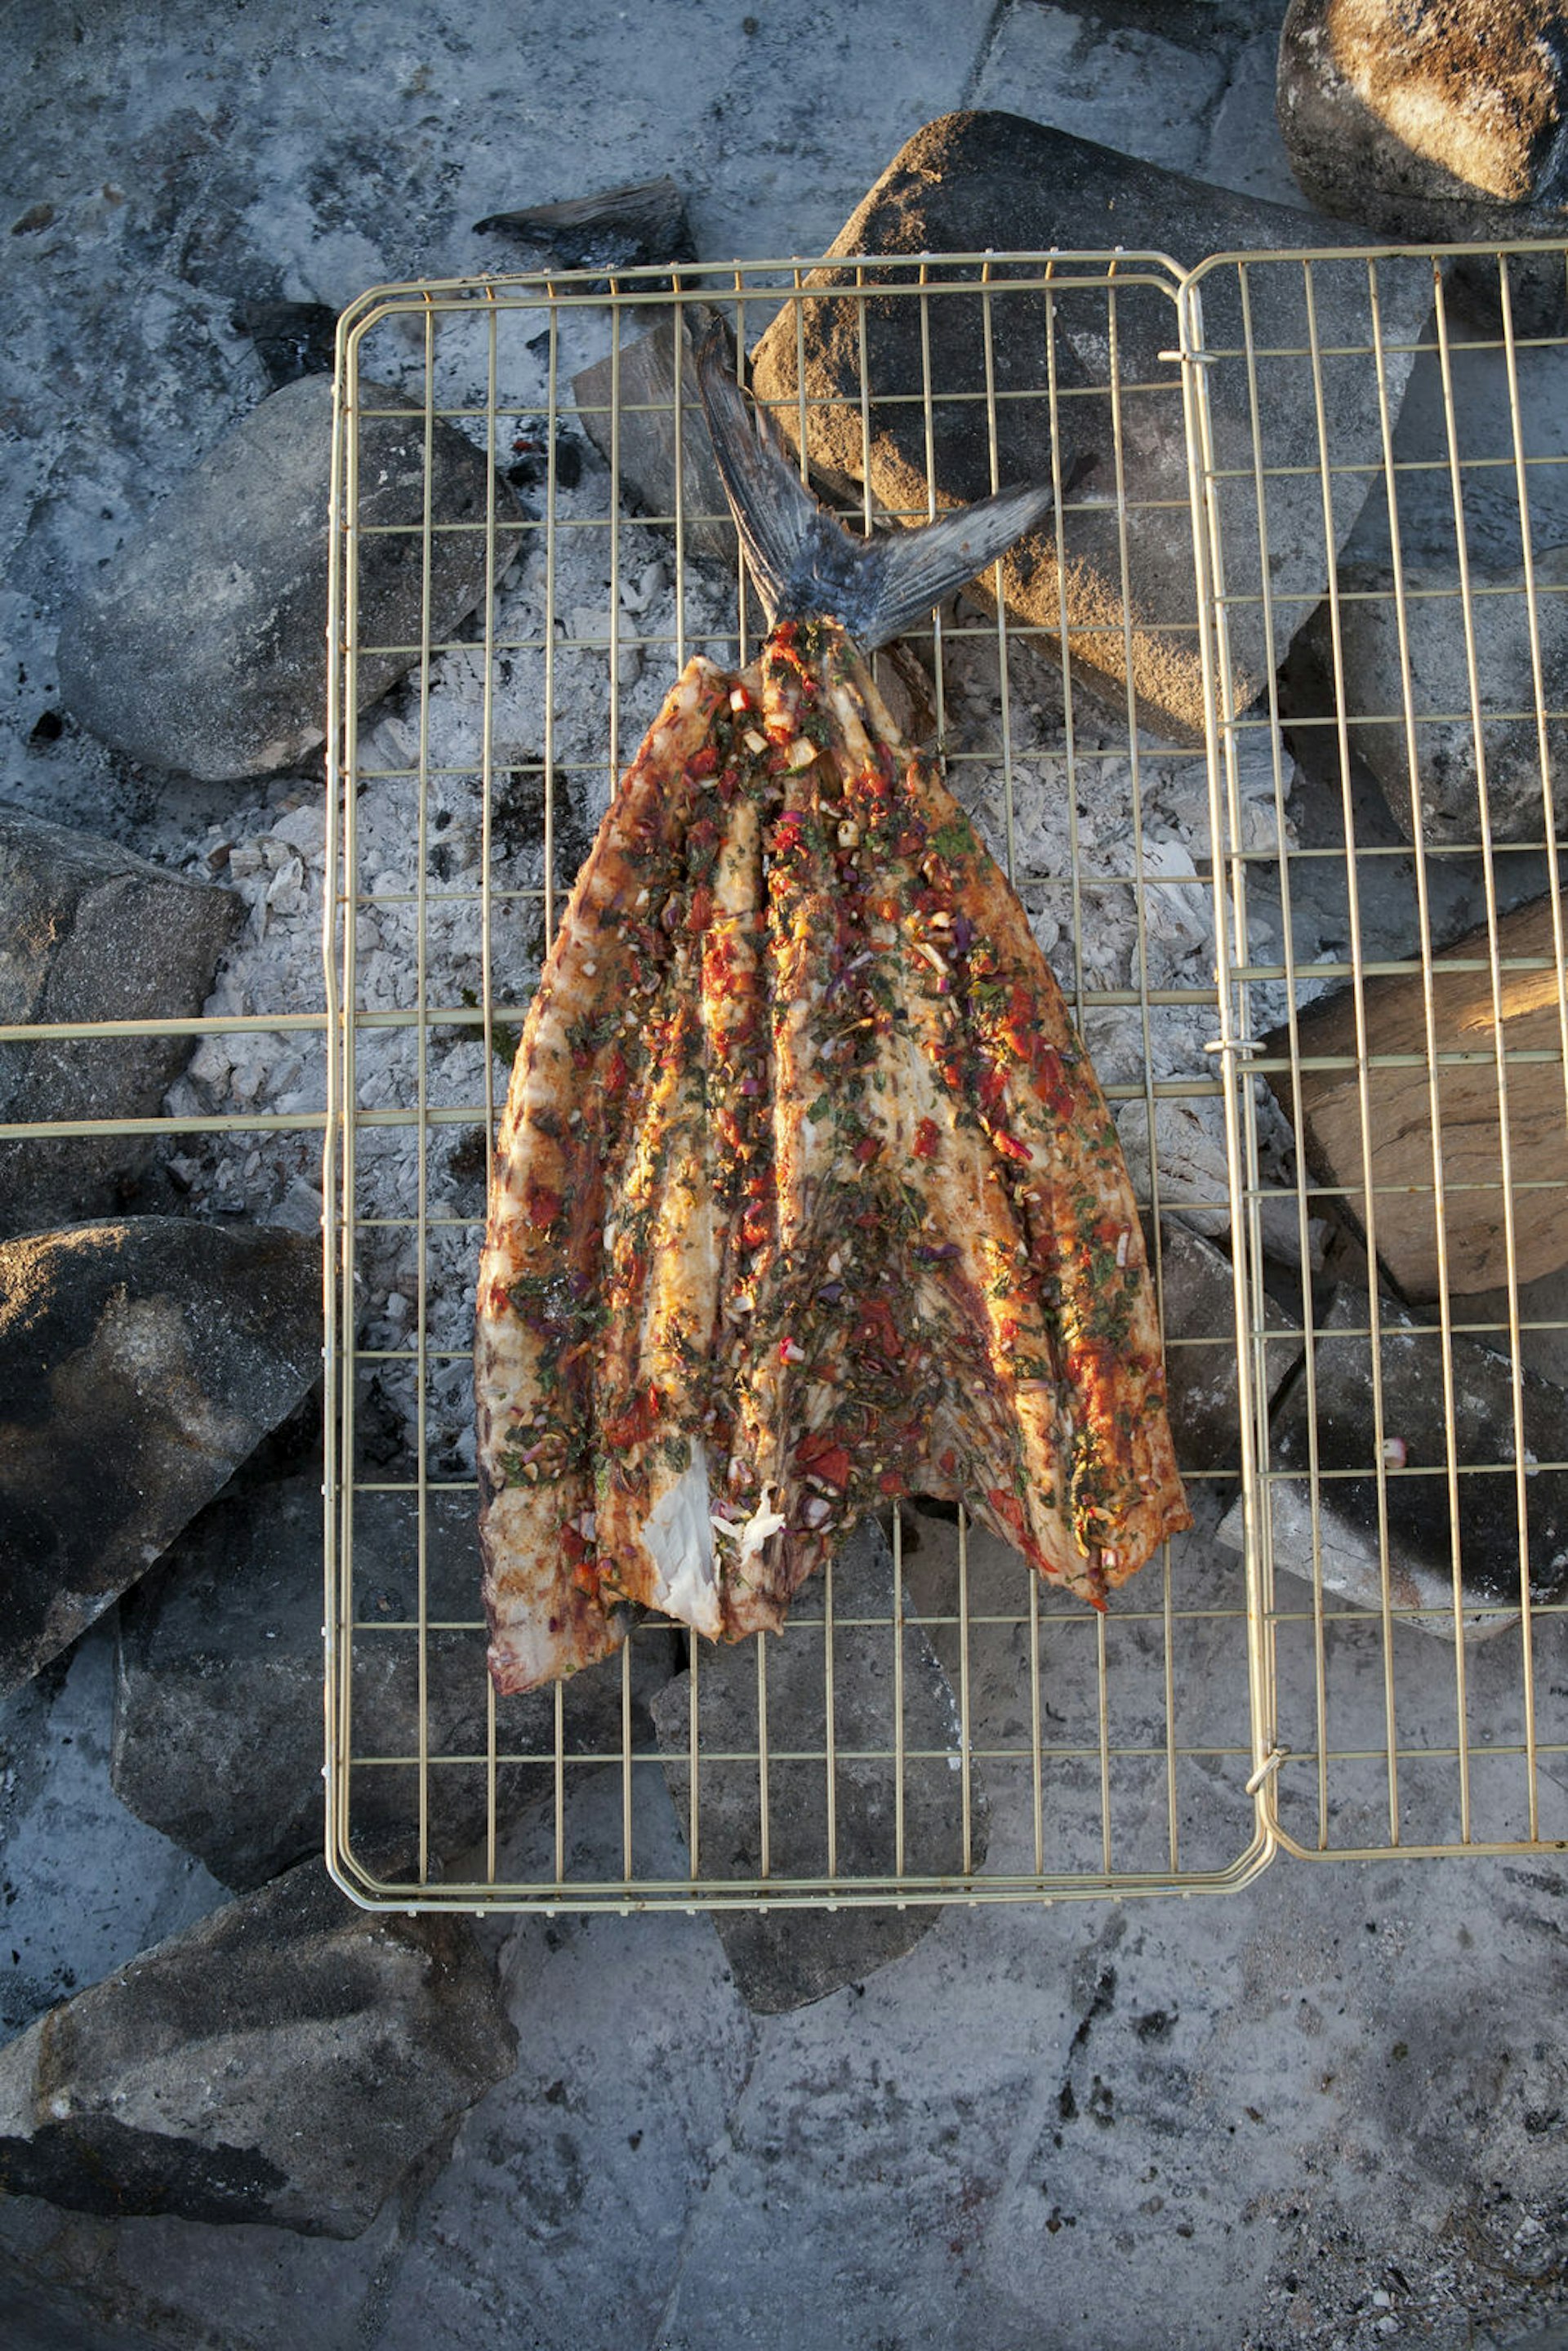 A snoek – the South African name for a barracouta – cooking on a braai, or traditional barbecue © Justin Bonello / Getty Images